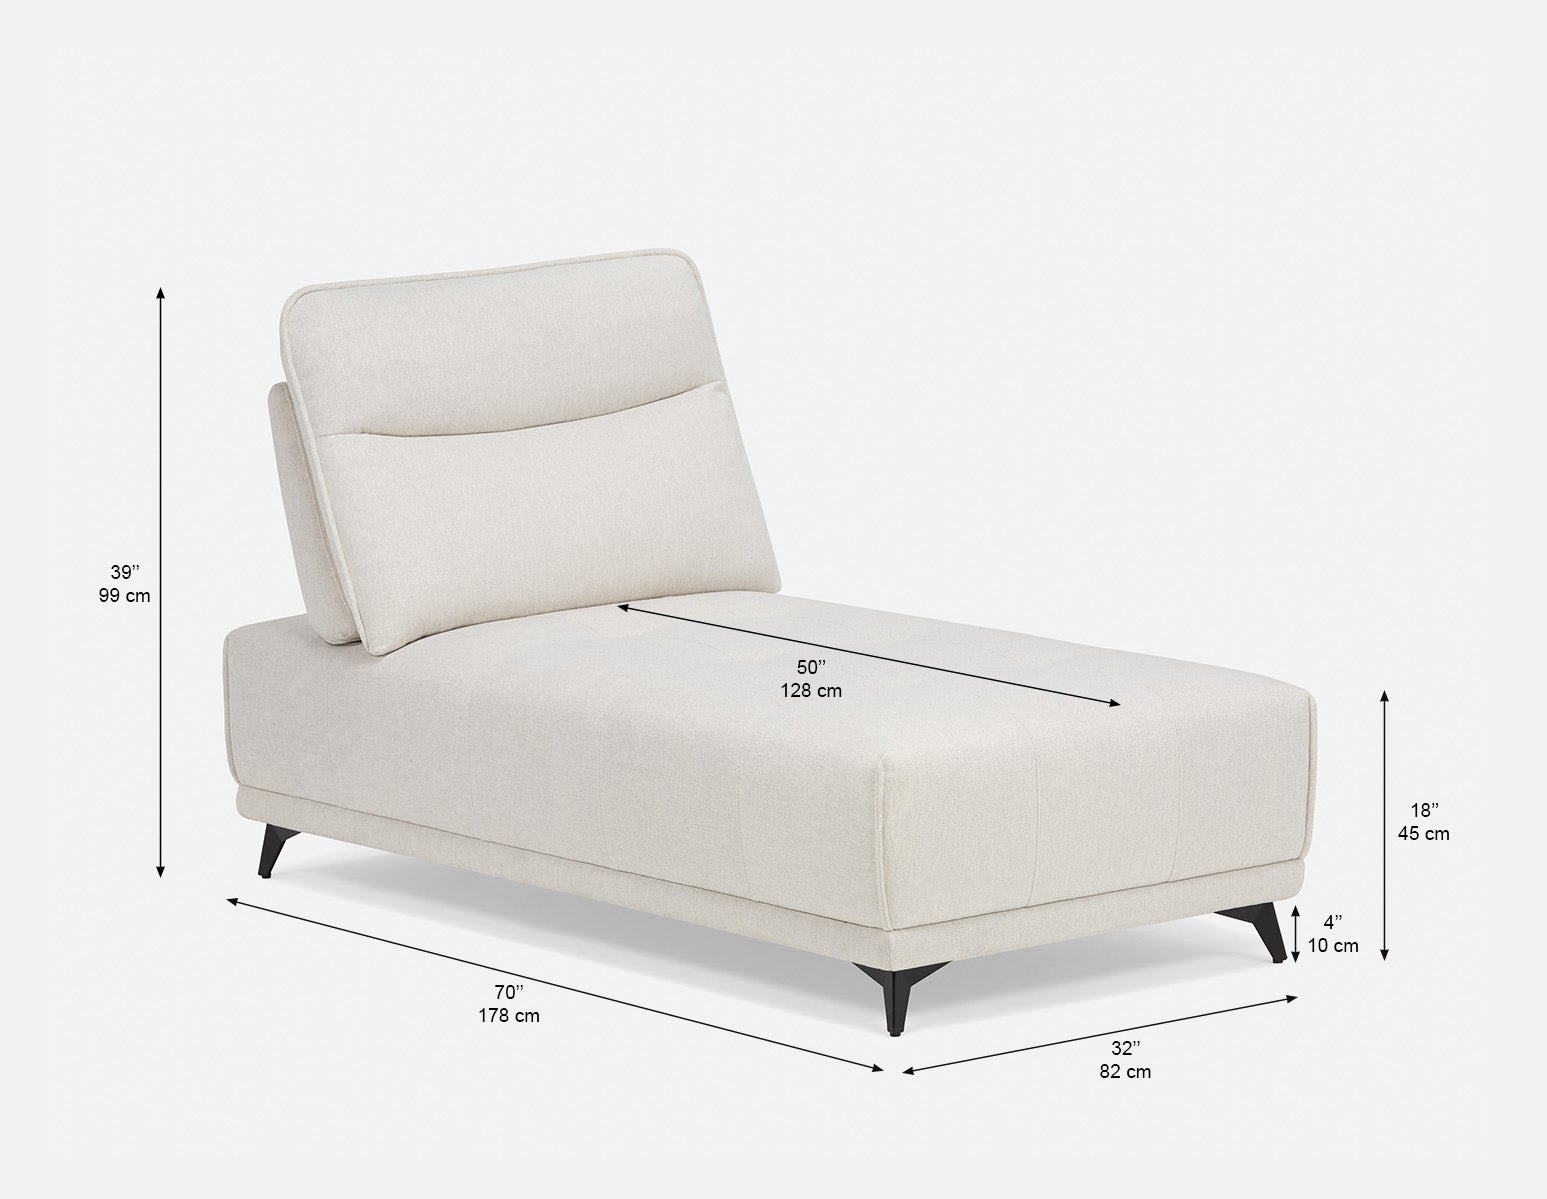 SIMON lounger with adjustable backrest